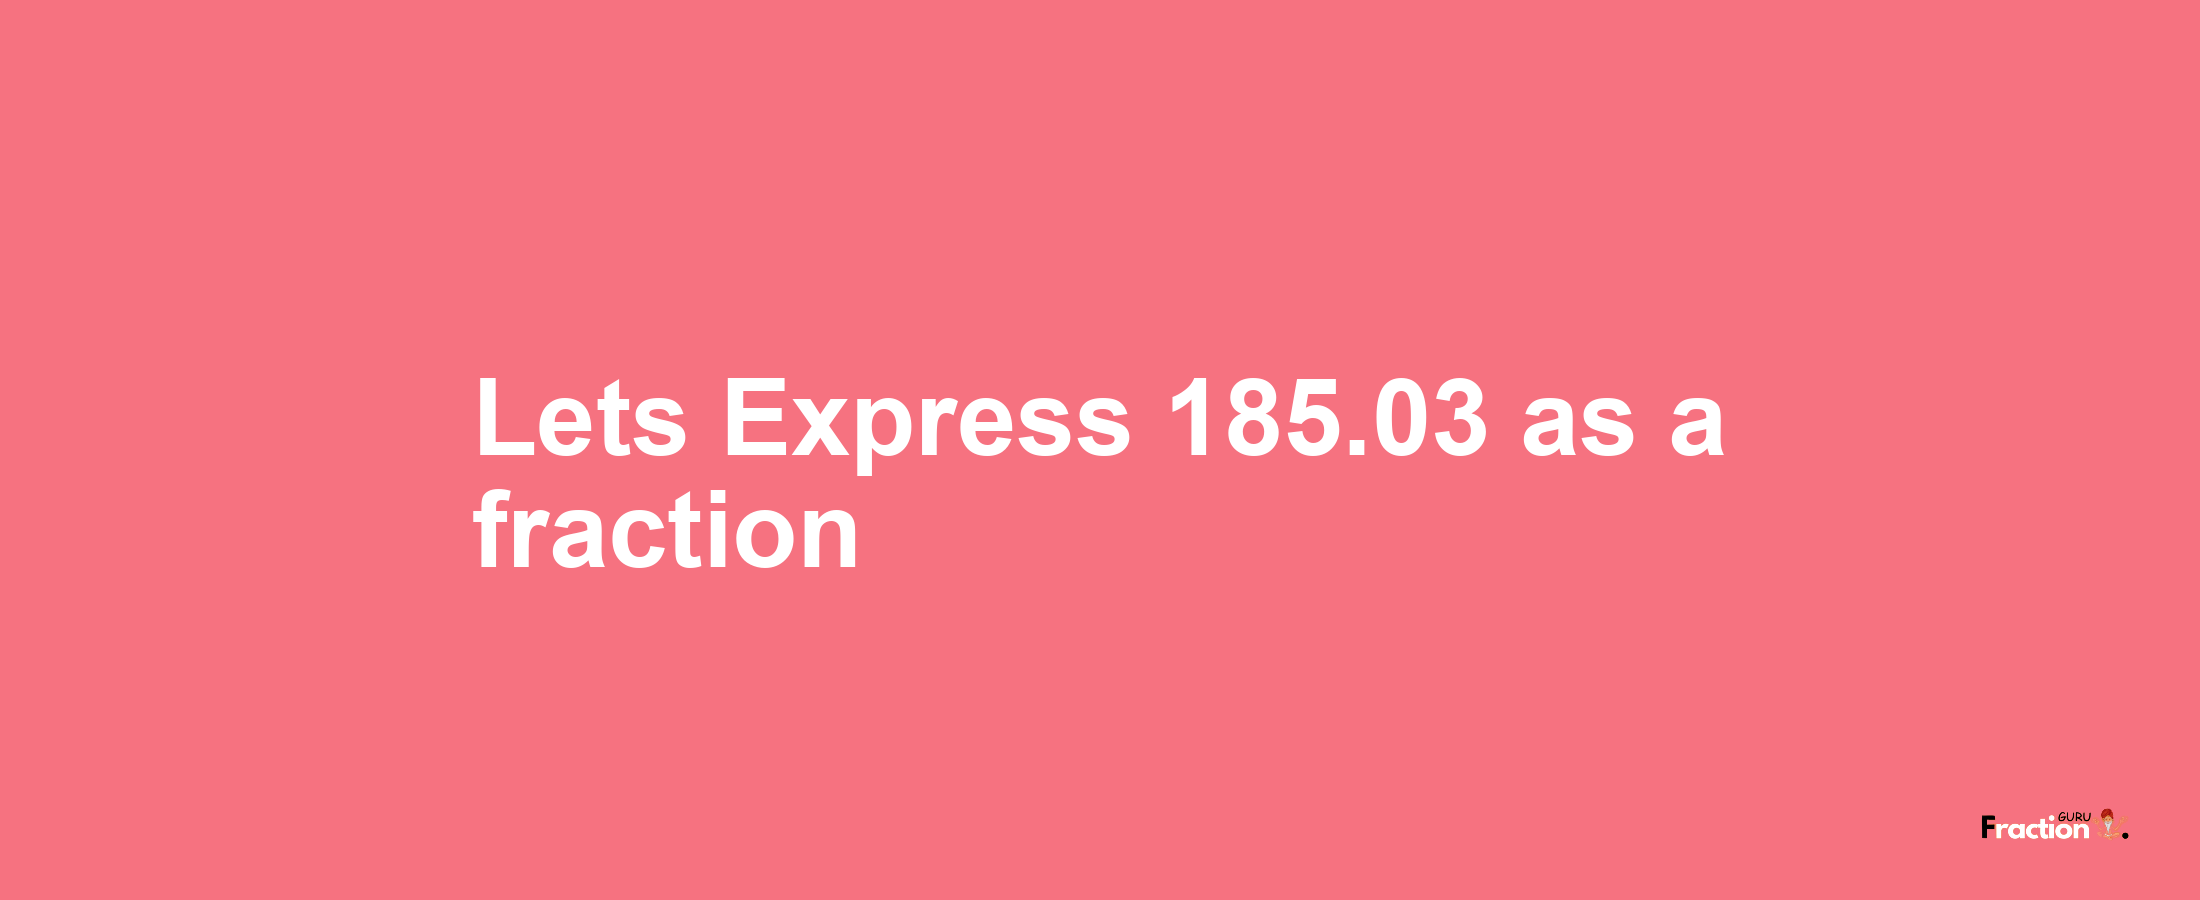 Lets Express 185.03 as afraction